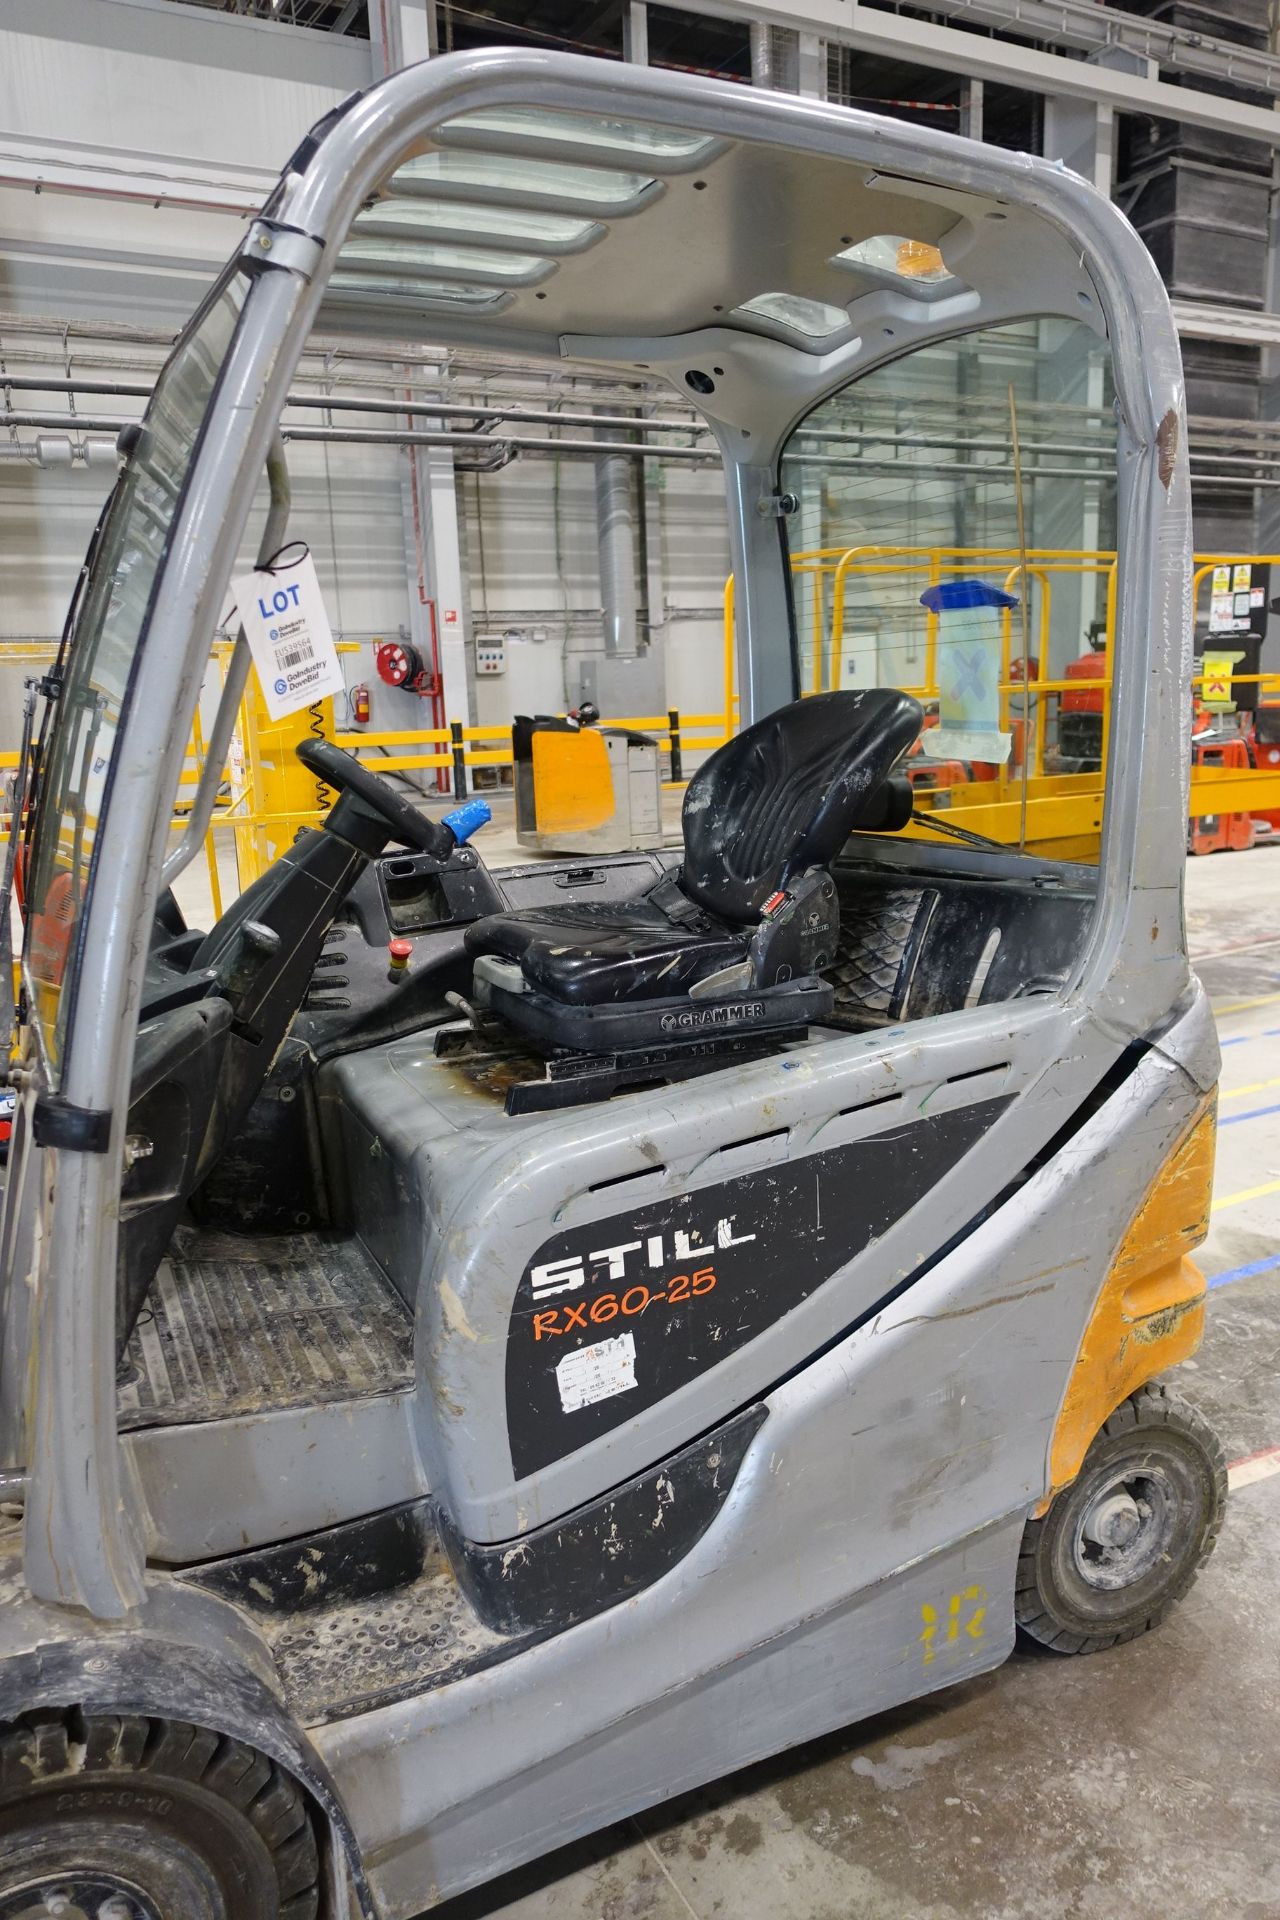 STILL RX60-25 Electric Forklift Truck, 2,500kg Capacity with Sideshift, Asset # 3000022, Ser # - Image 29 of 52